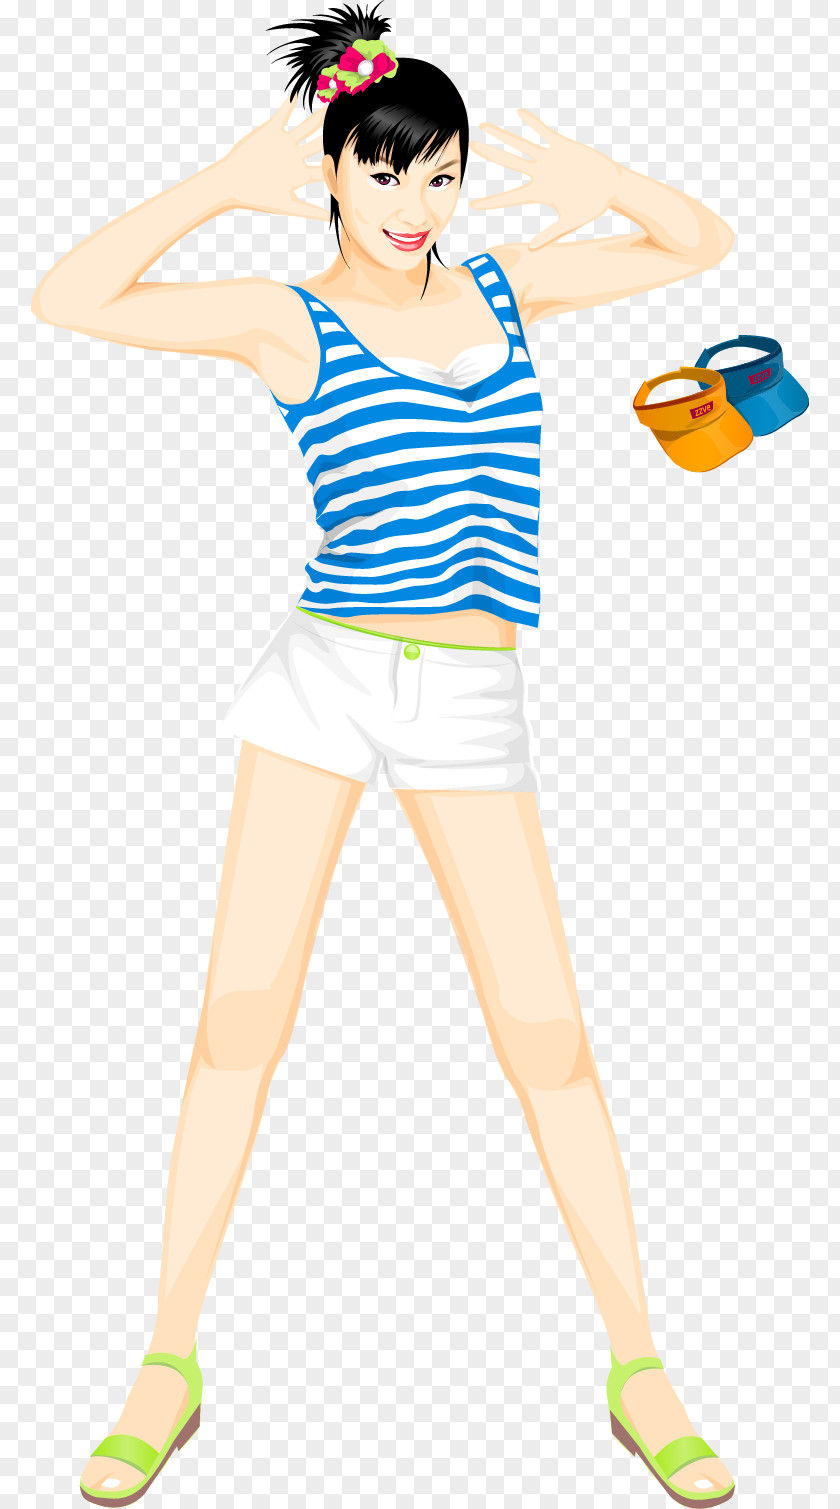 Wearing Shorts And Vest Cool Beauty Vector Material Adobe Illustrator Clip Art PNG